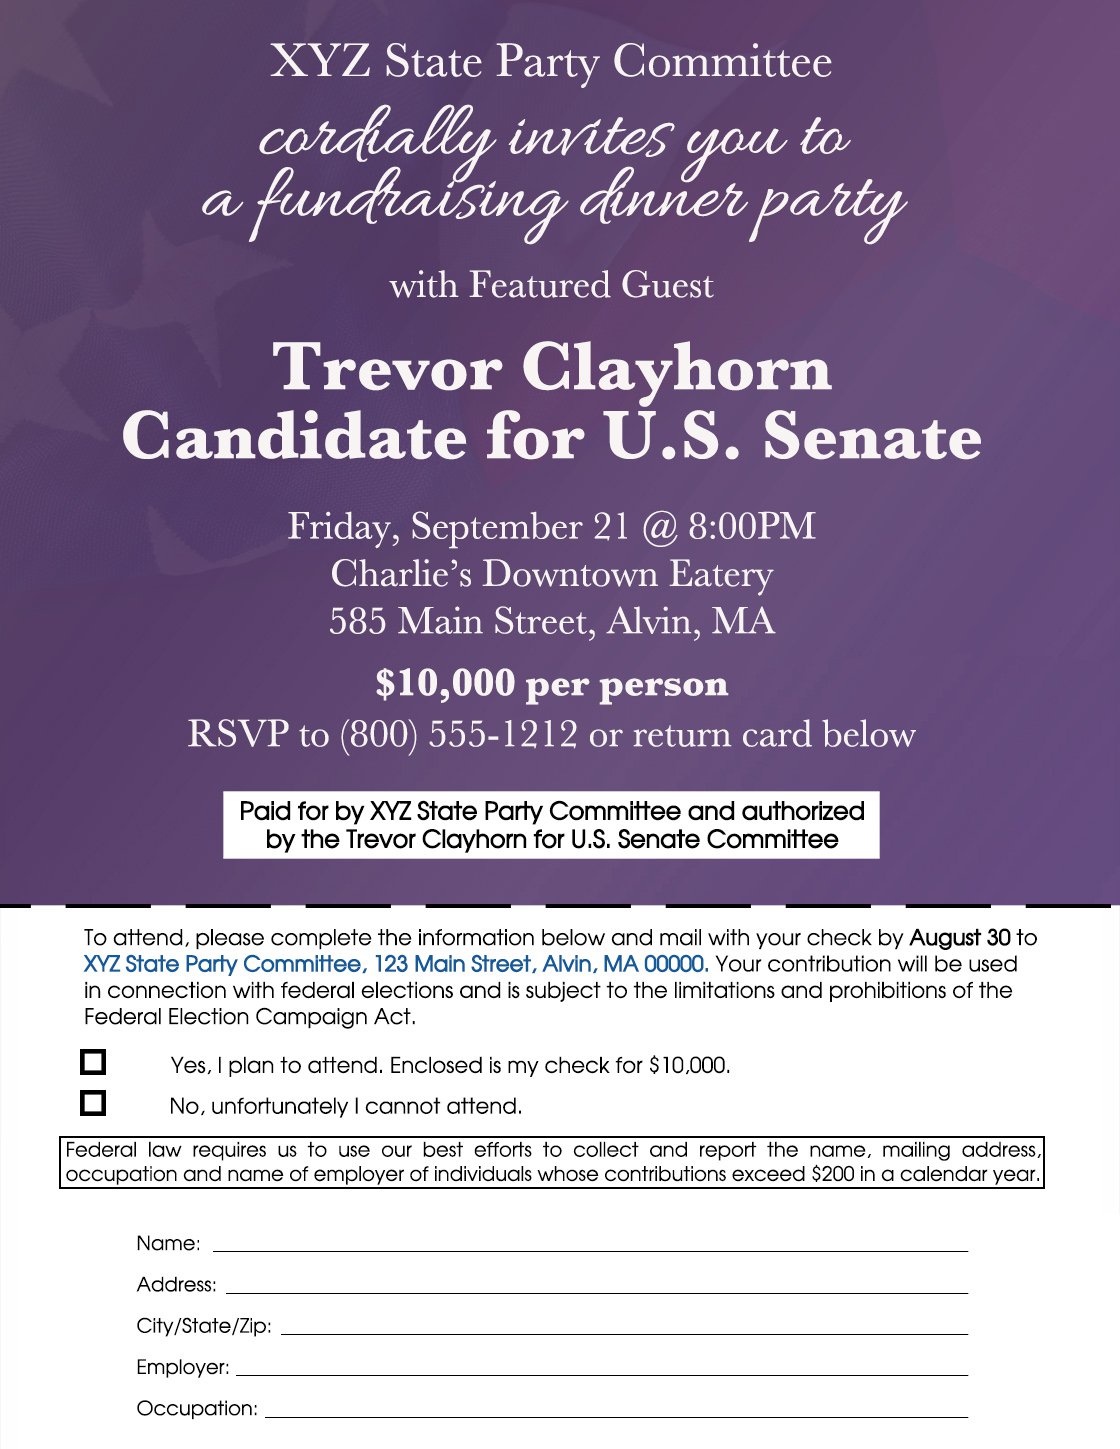 Image of a disclaimer example of a state party committee's invitation featuring a federal candidate as a guest